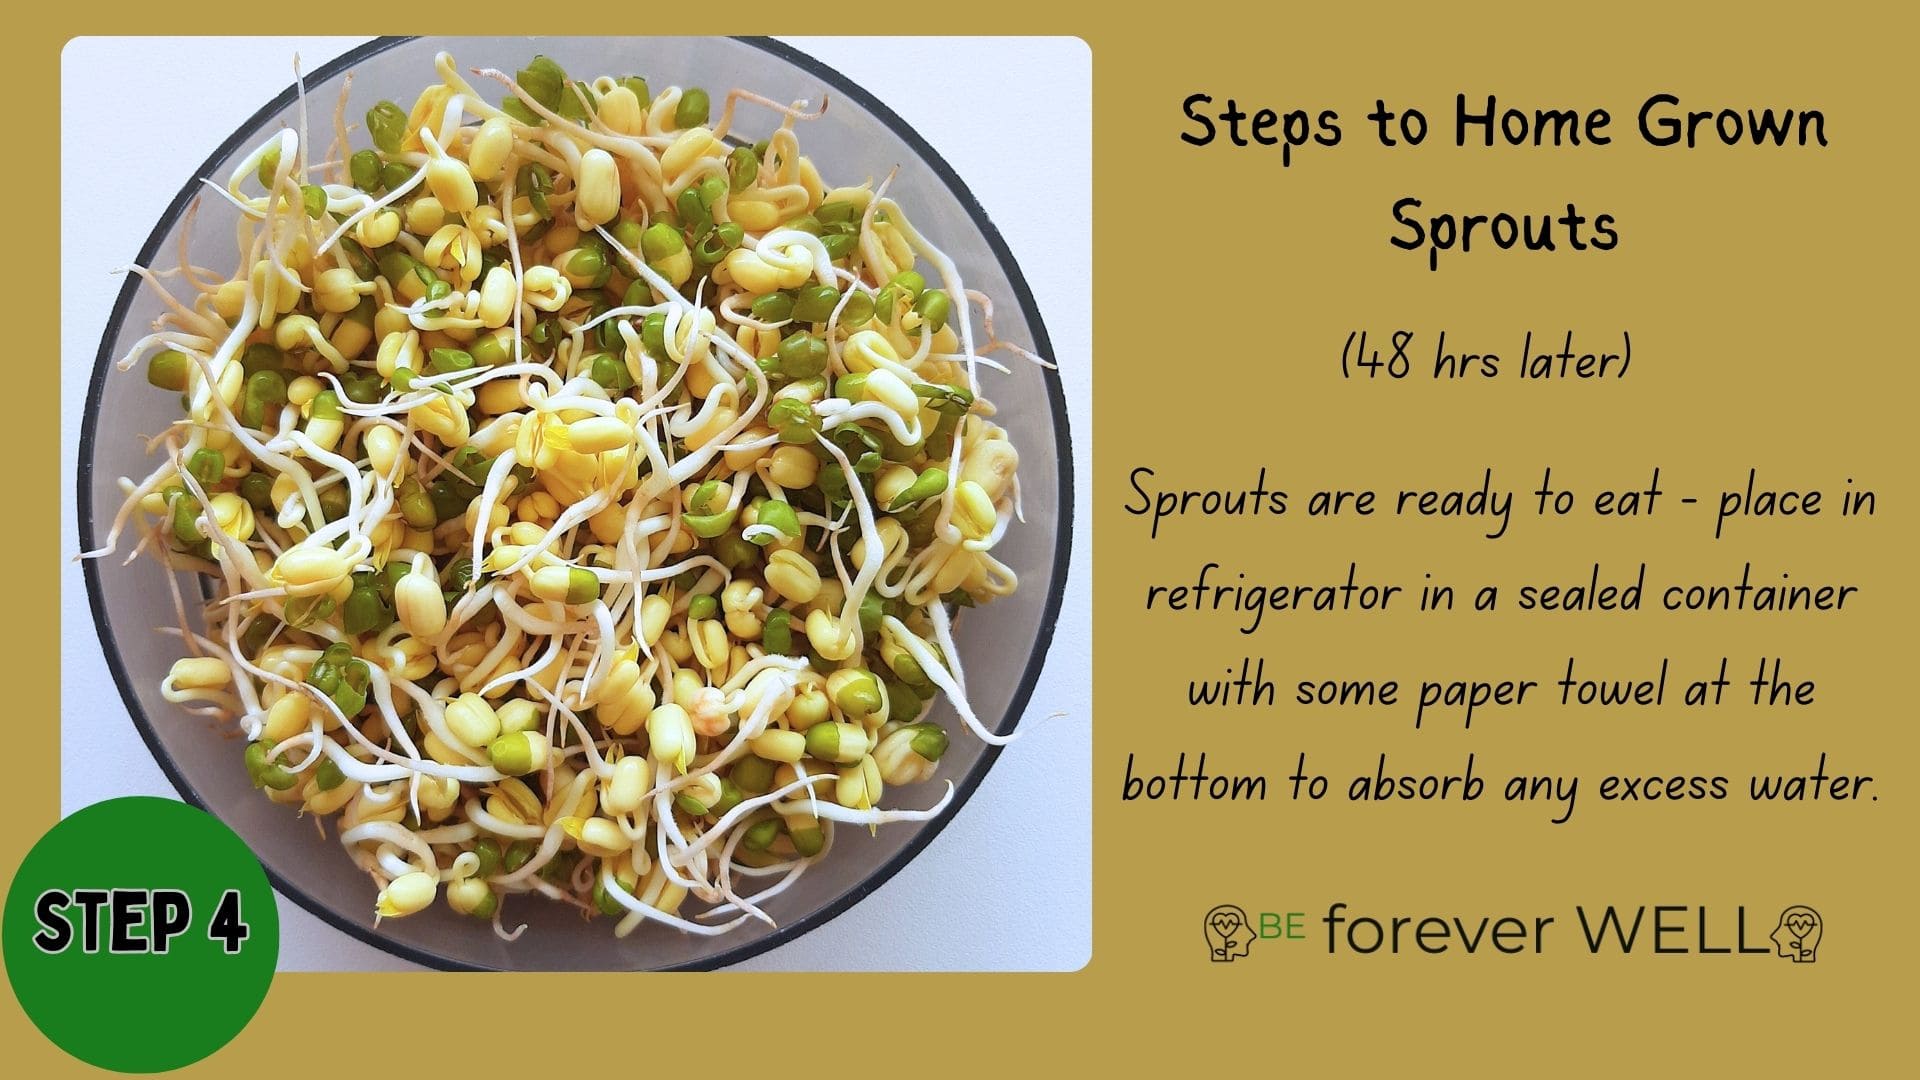 Health Benefits of Sprouting Seeds: Small But Powerful